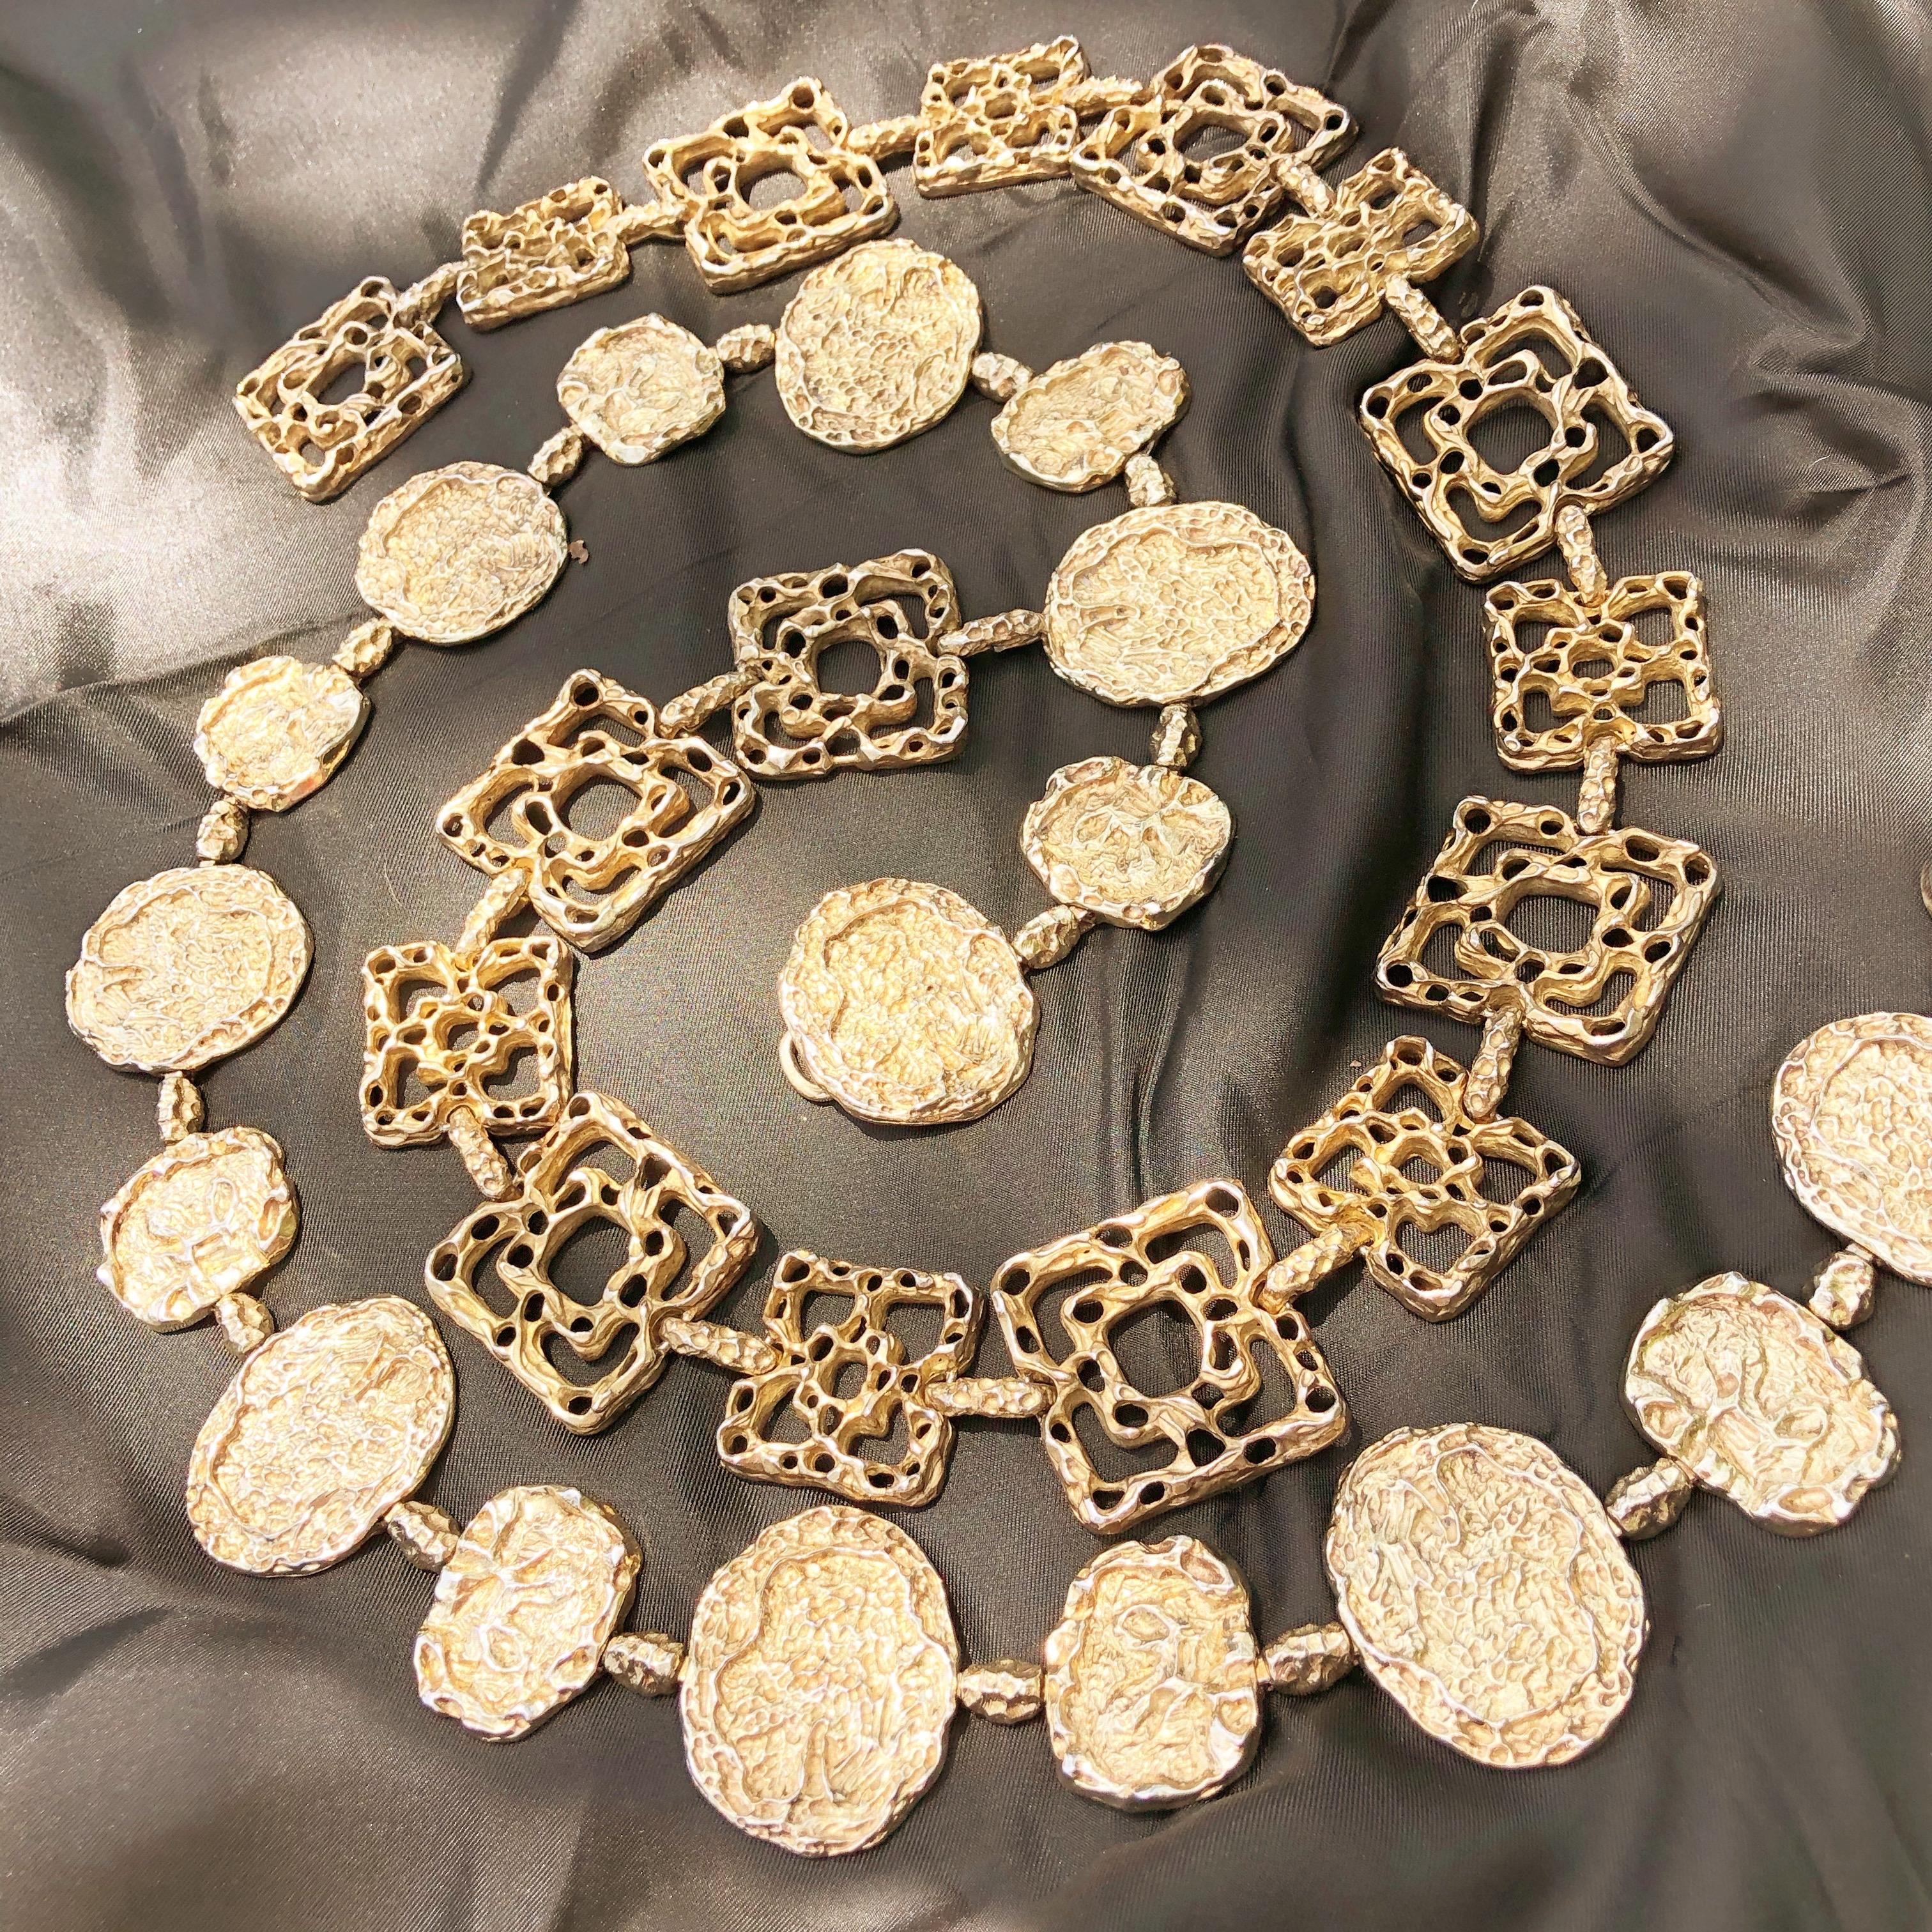 This stunning and iconic gold vermeil belt by Cartier, circa 1970, doubles as a chunky statement necklace. This highly sought after and coveted belt is made from solid sterling silver covered in 24 karat gold, is marked 